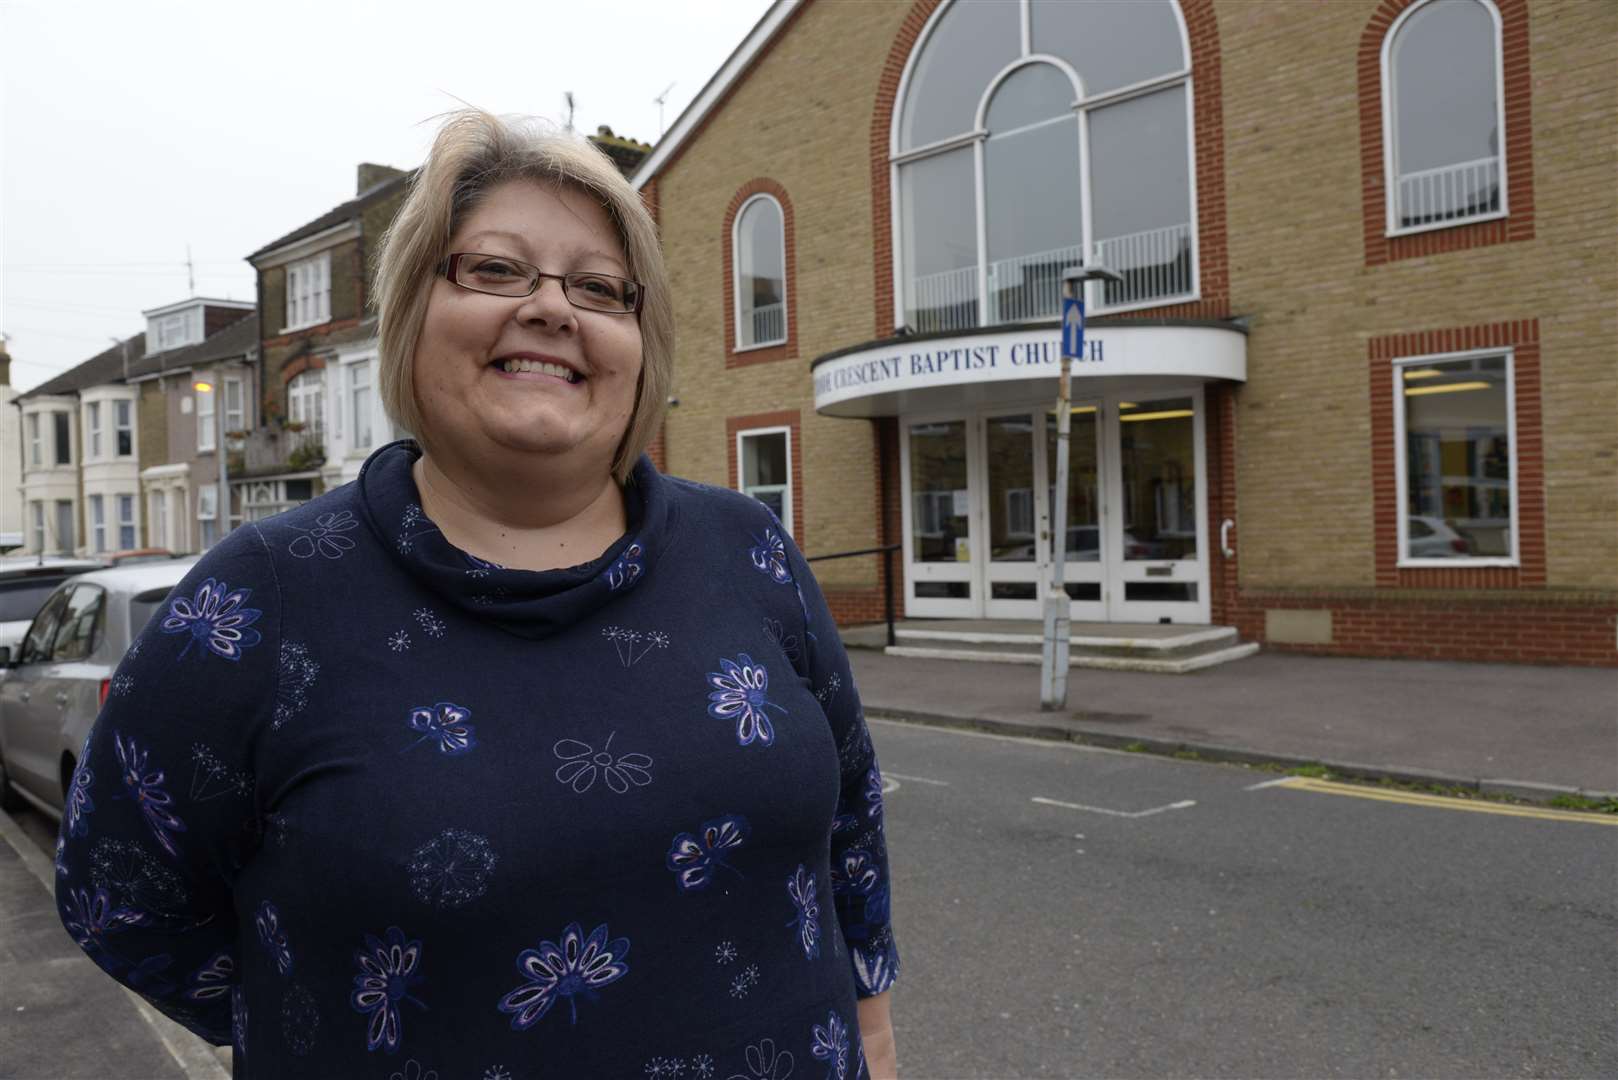 The Rev Clare van der Berg (nee Atkin), the Minister at Strode Crescent Baptist Church, Sheerness. Picture: Chris Davey FM4116200 (1304768)